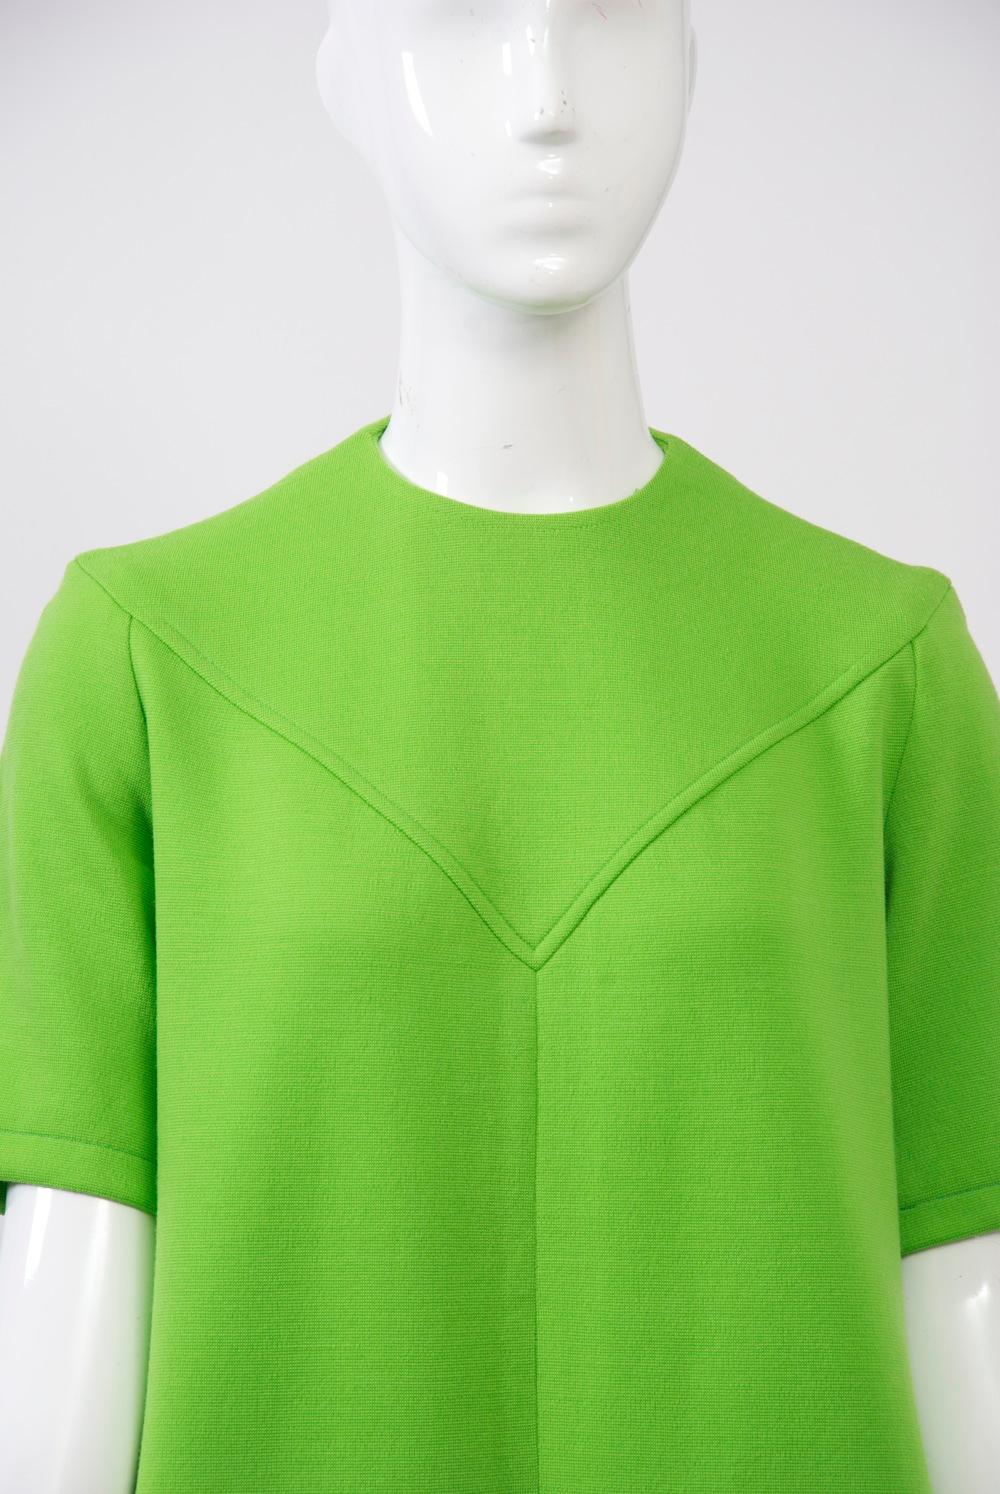 Double-knit wool dress in bright green by Kimberly, featuring A-line shape, short sleeves, a round neck and welted seaming at the integrated V and straight yoke in back; diagonal bound pockets. Back zipper. Approximate size 8. 
Kimberly Knitwear was